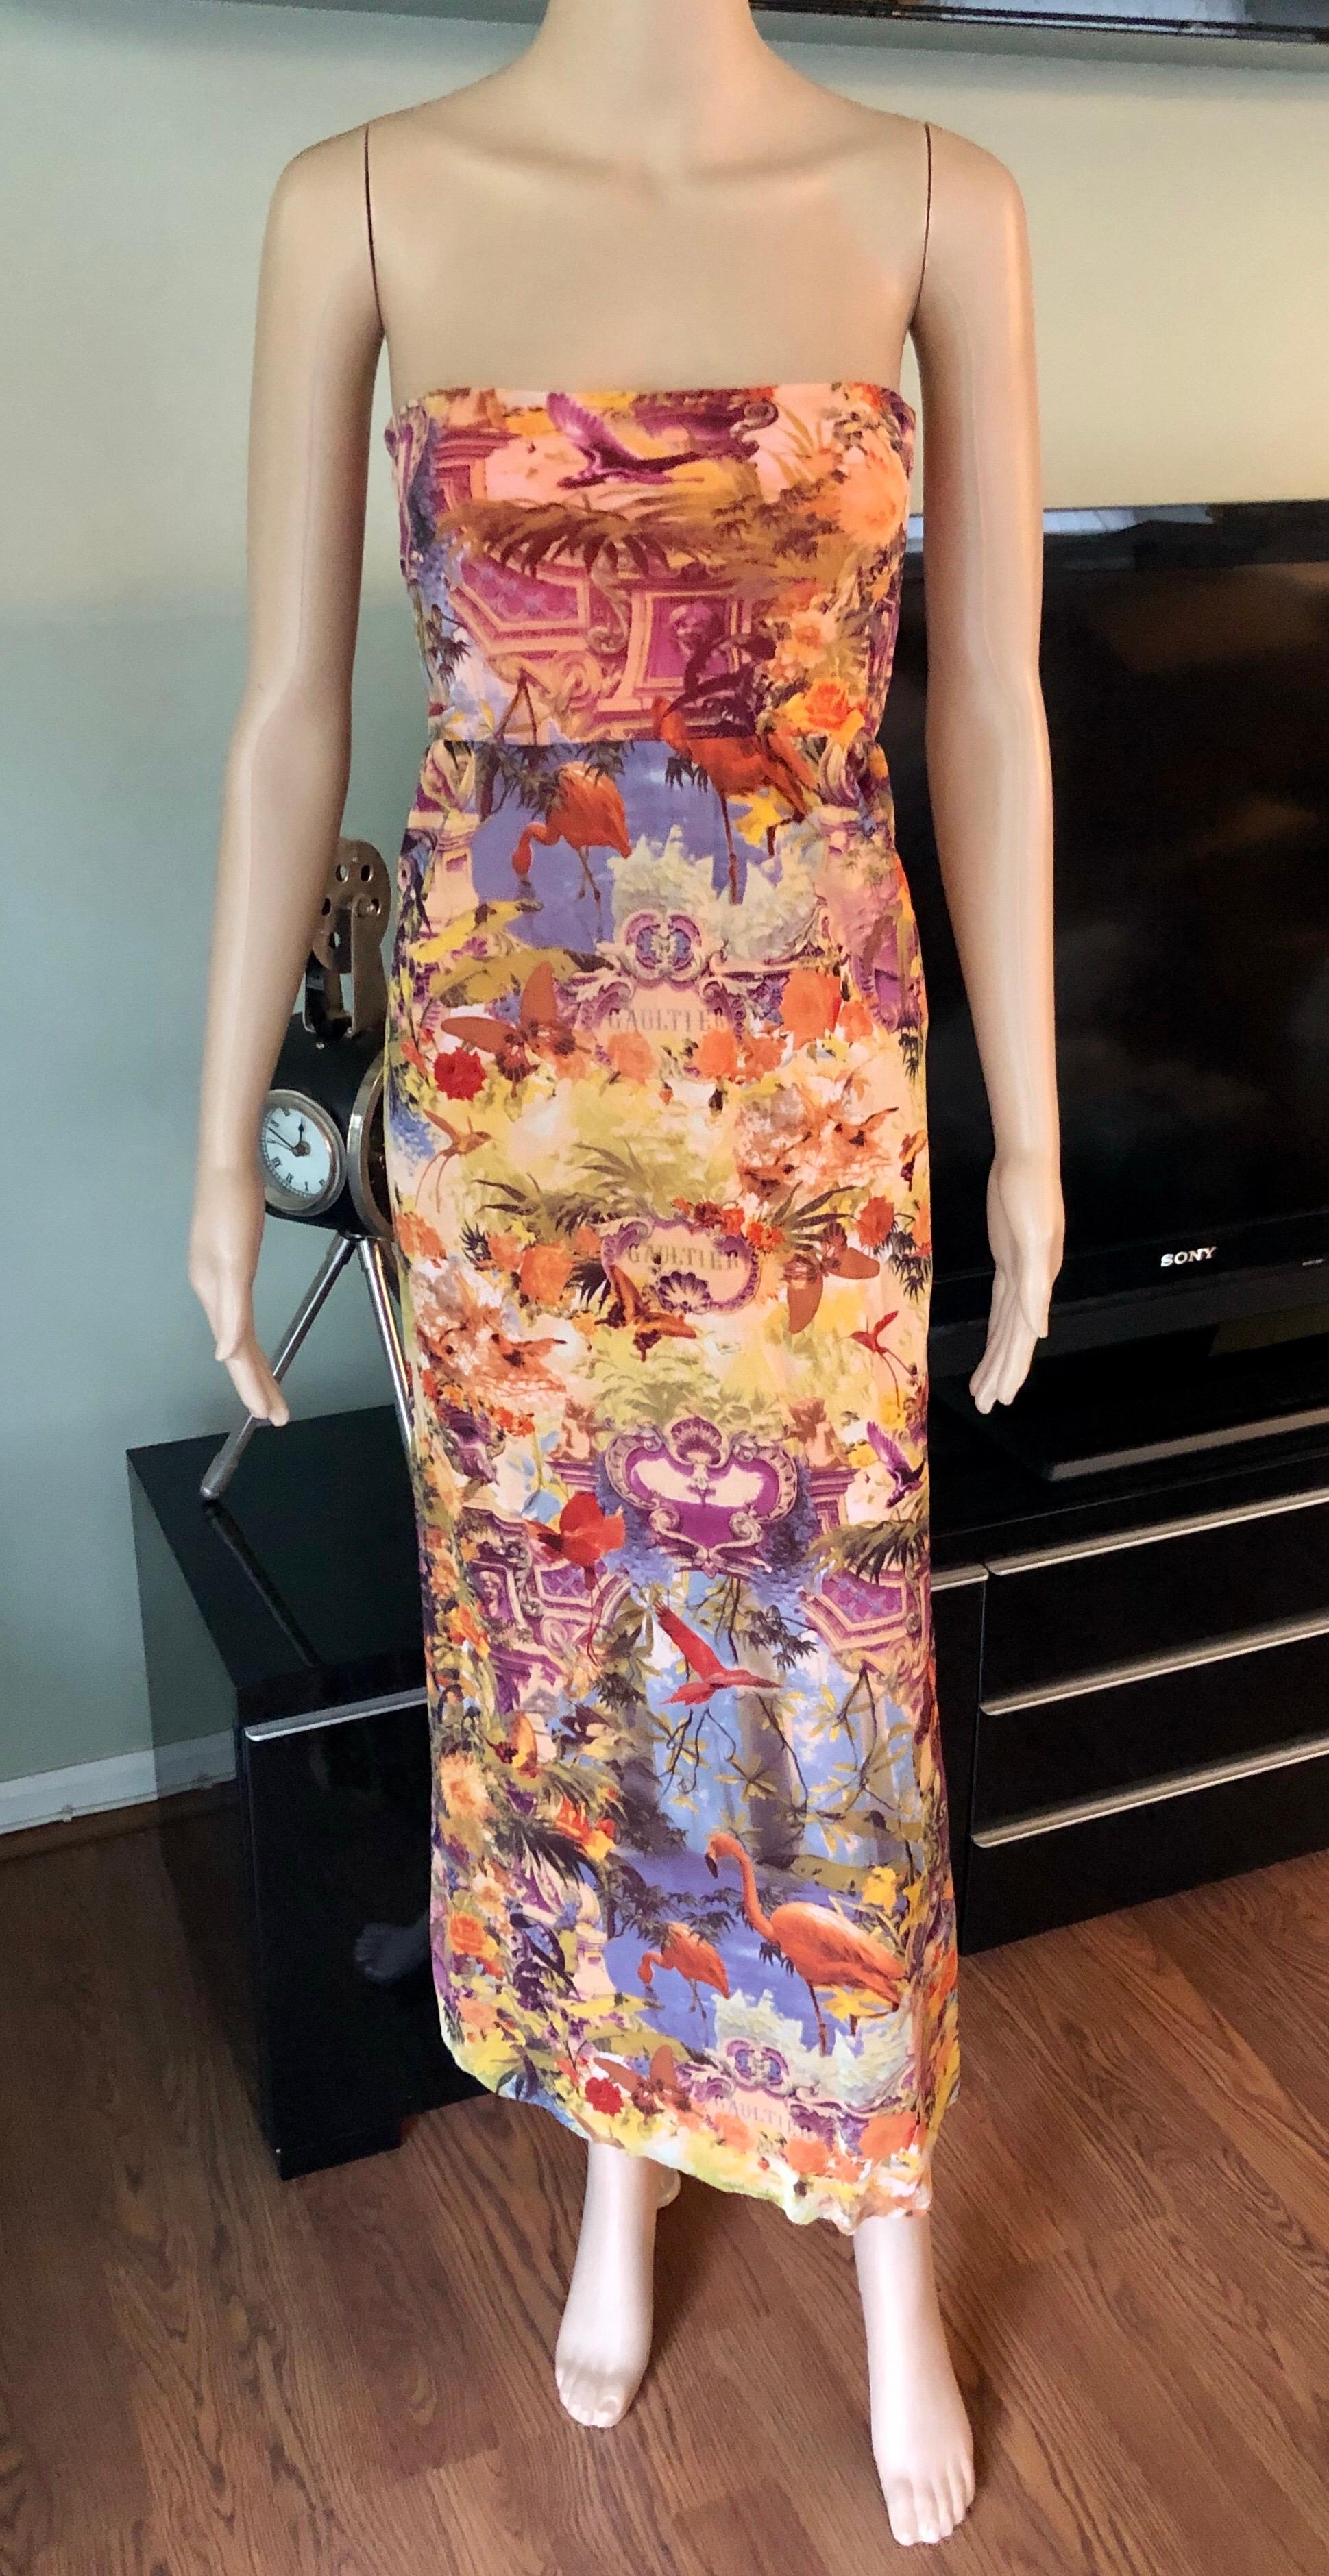 Jean Paul Gaultier Soleil Tropical Flamingo Print Logo Semi-Sheer Mesh Maxi Skirt Dress Size M

Please note this piece is very versatile and it could be worn as a strapless dress or a maxi skirt as shown in last two photos.